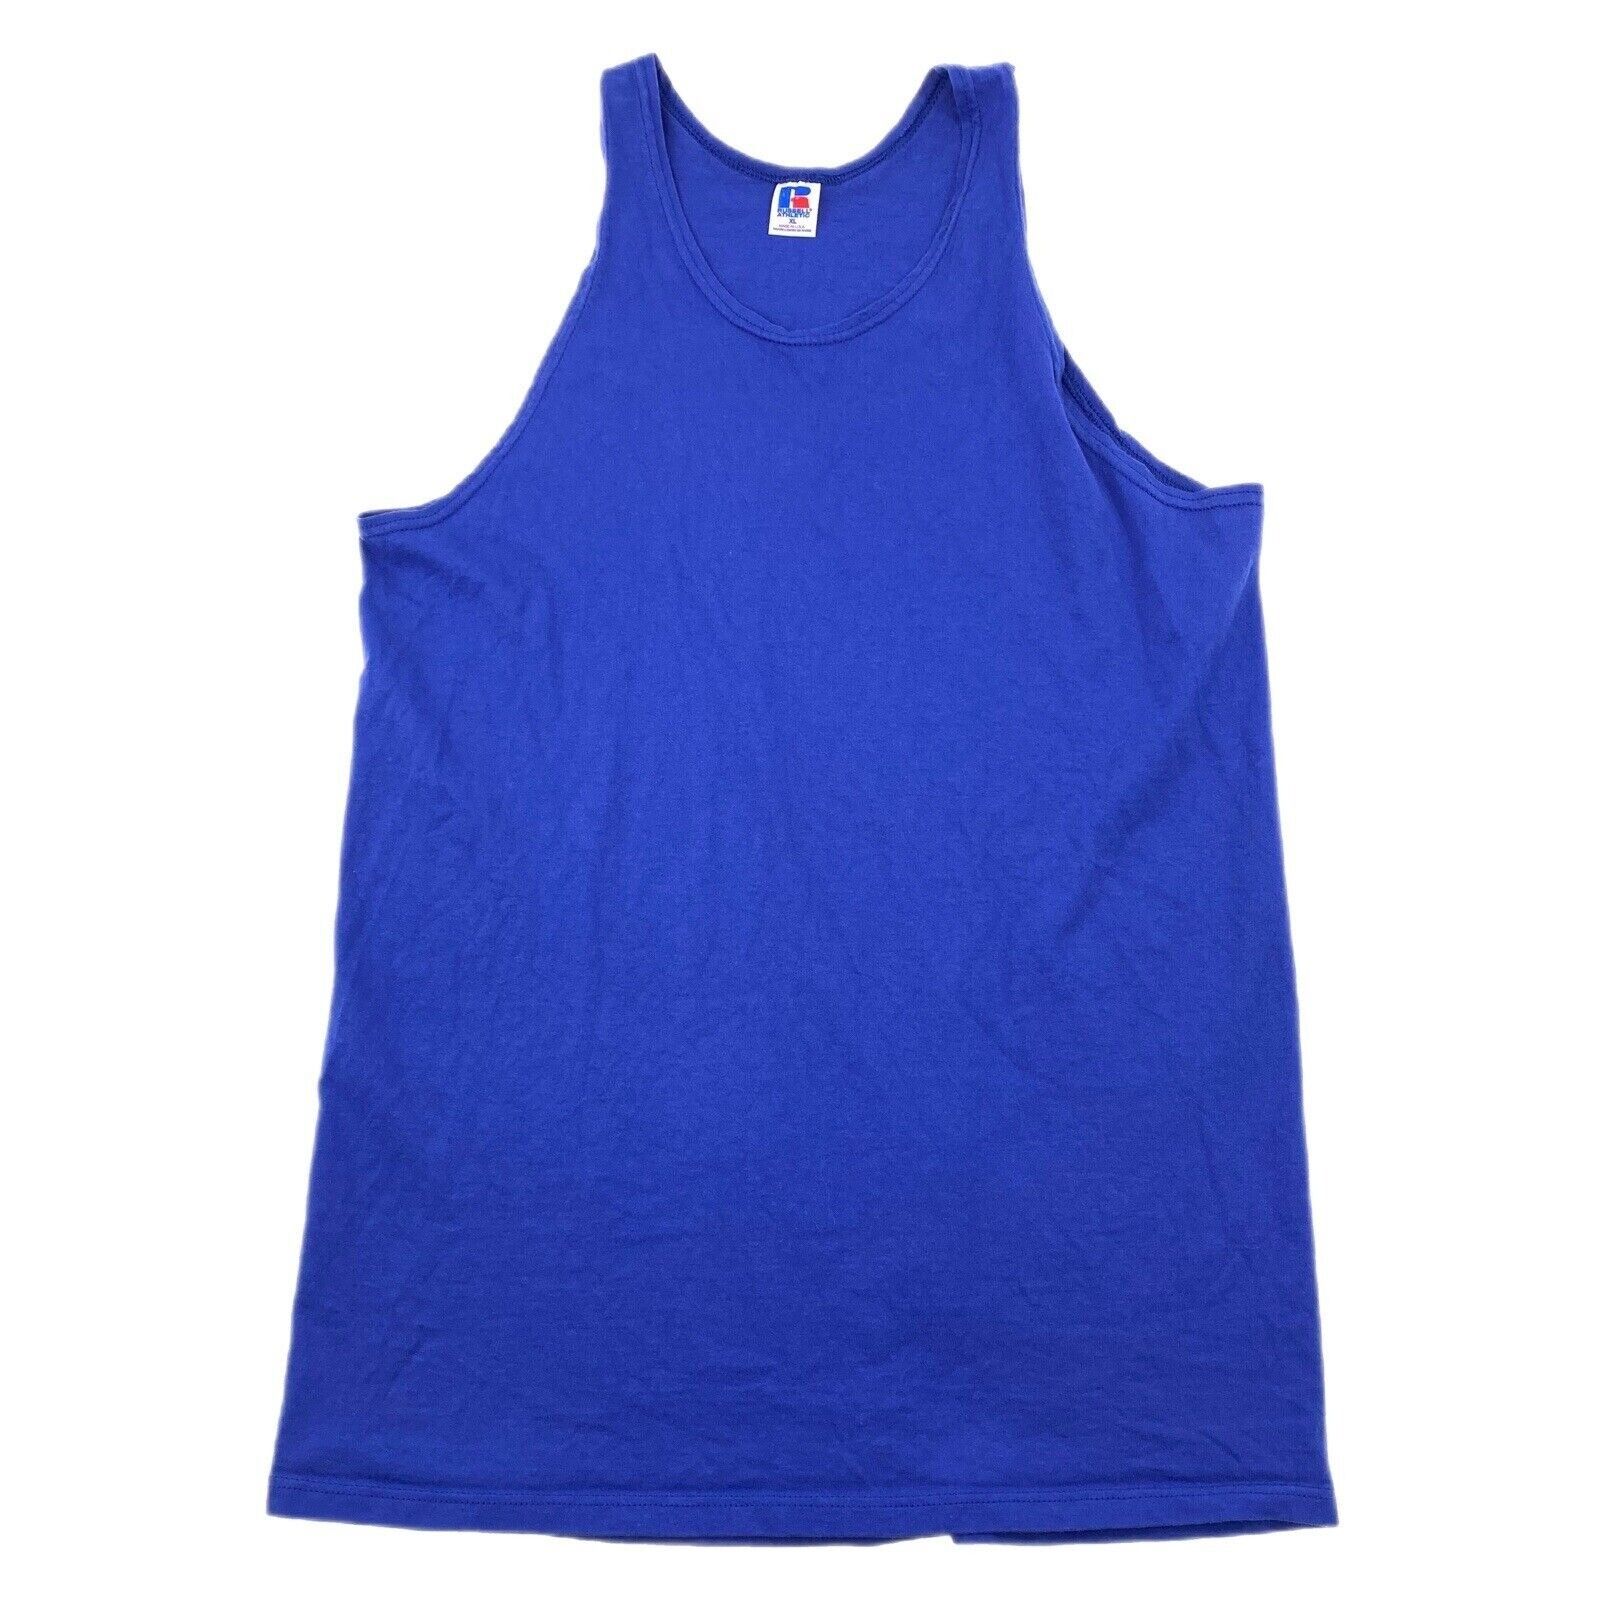 Russell Athletic Vintage 90s Mens L RUSSELL ATHLETIC Blue Tank Top ...